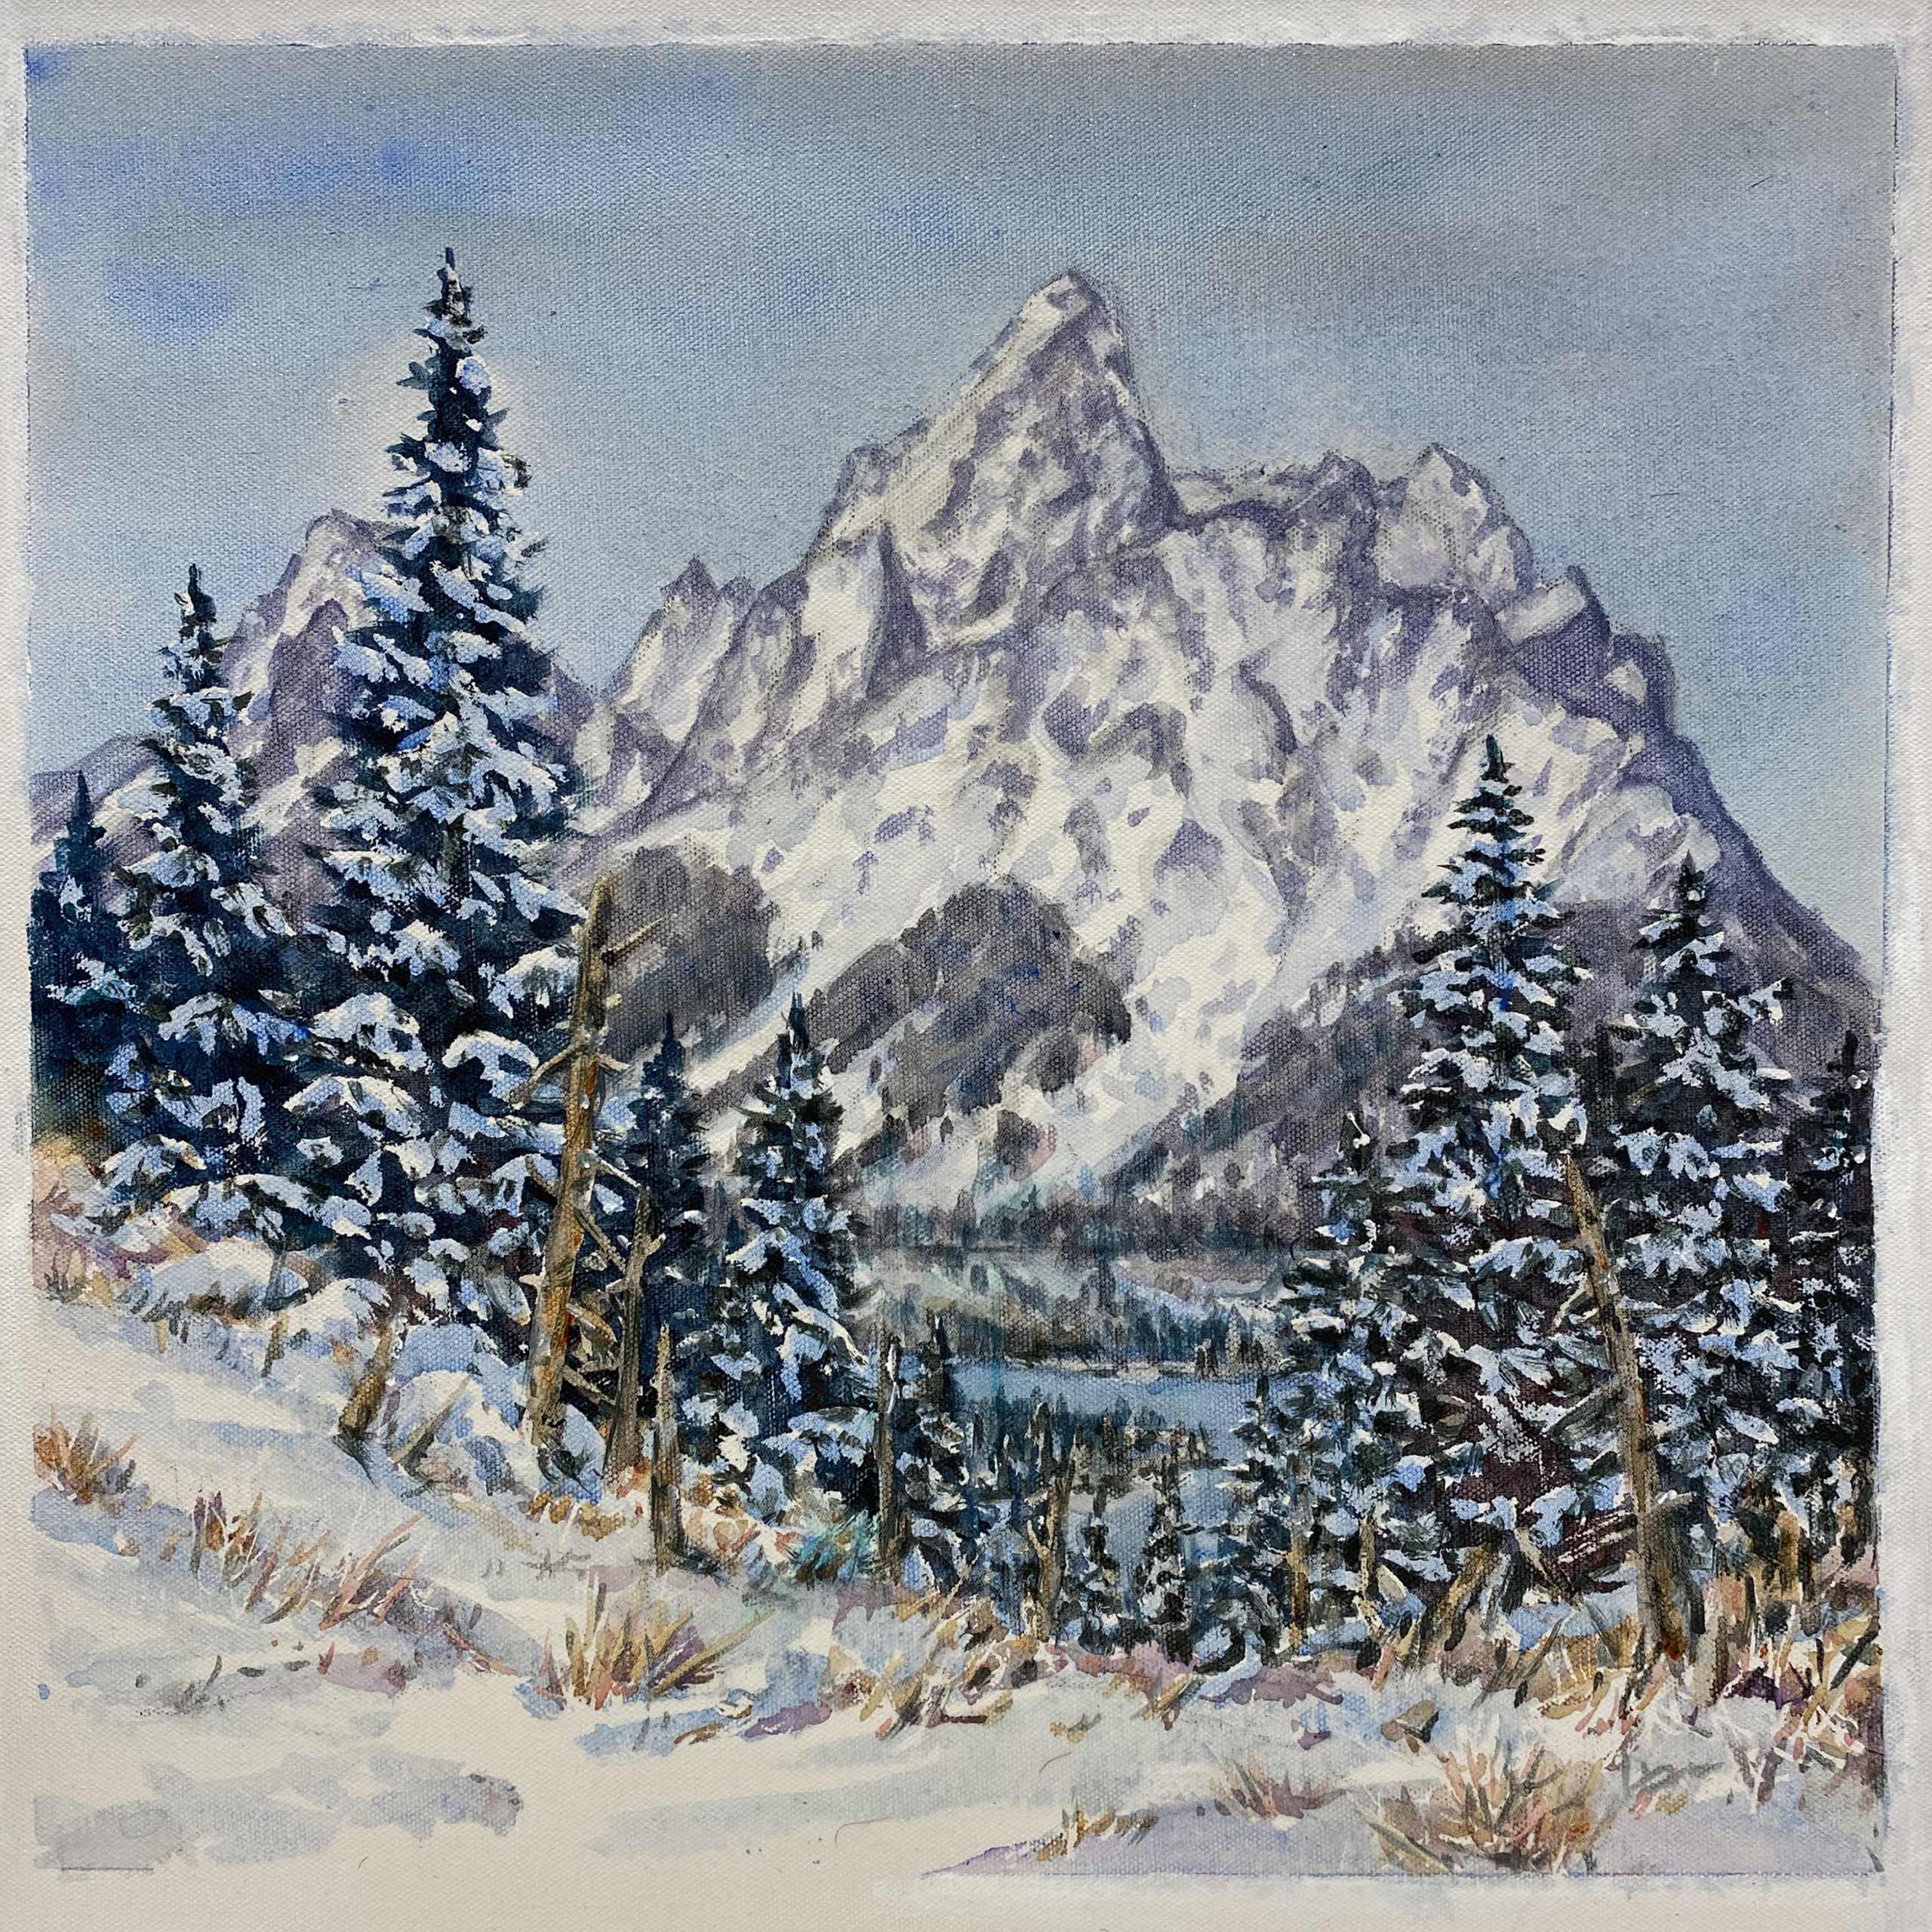 Moose Painting Grand Teton National Park Scenery Autumn Forest Original Miniature Watercolor 4 by 6 inches